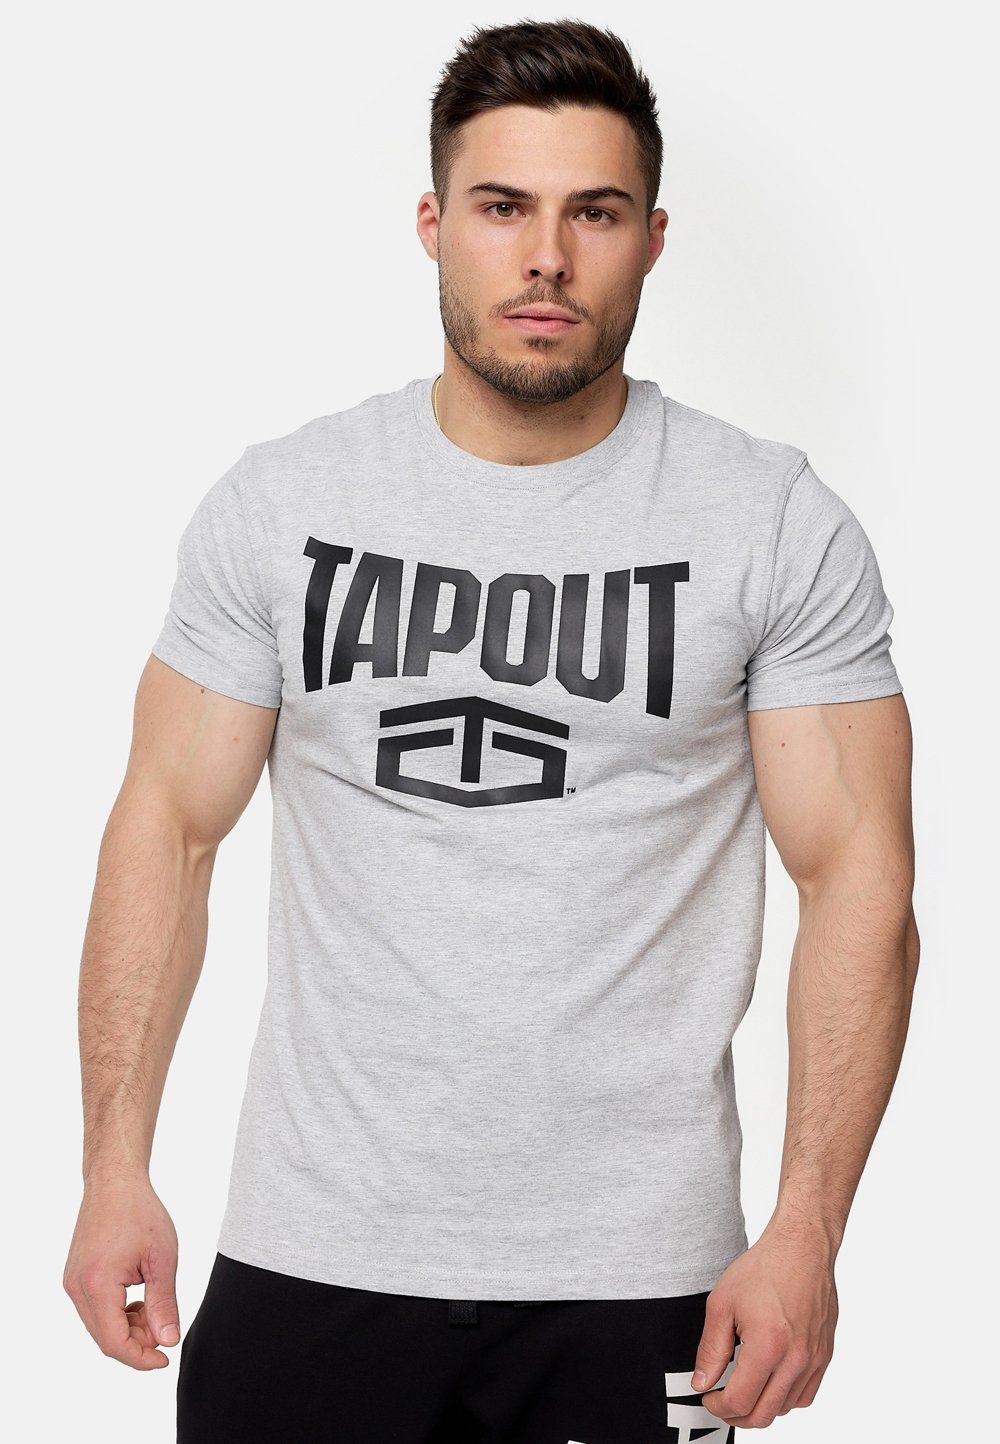 TAPOUT T-Shirt ACTIVE BASIC TEE Marl Grey/Black